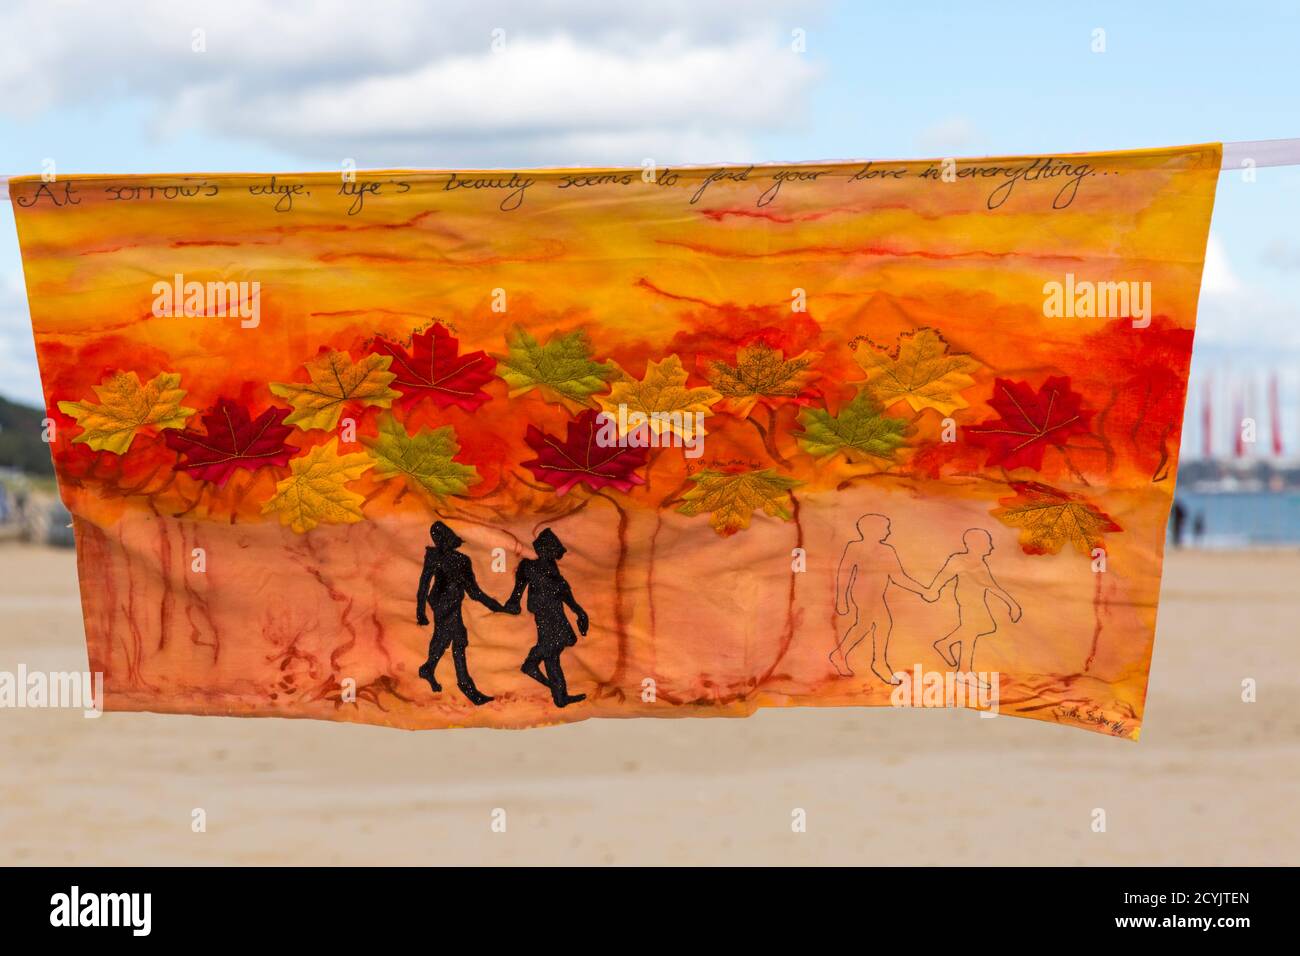 Speak To The Sea And Process Art Installation At Sandbanks Beach, Part Of The Bournemouth Arts By The Sea Festival, Dorset Uk In October - Pillowcase Stock Photo - Alamy